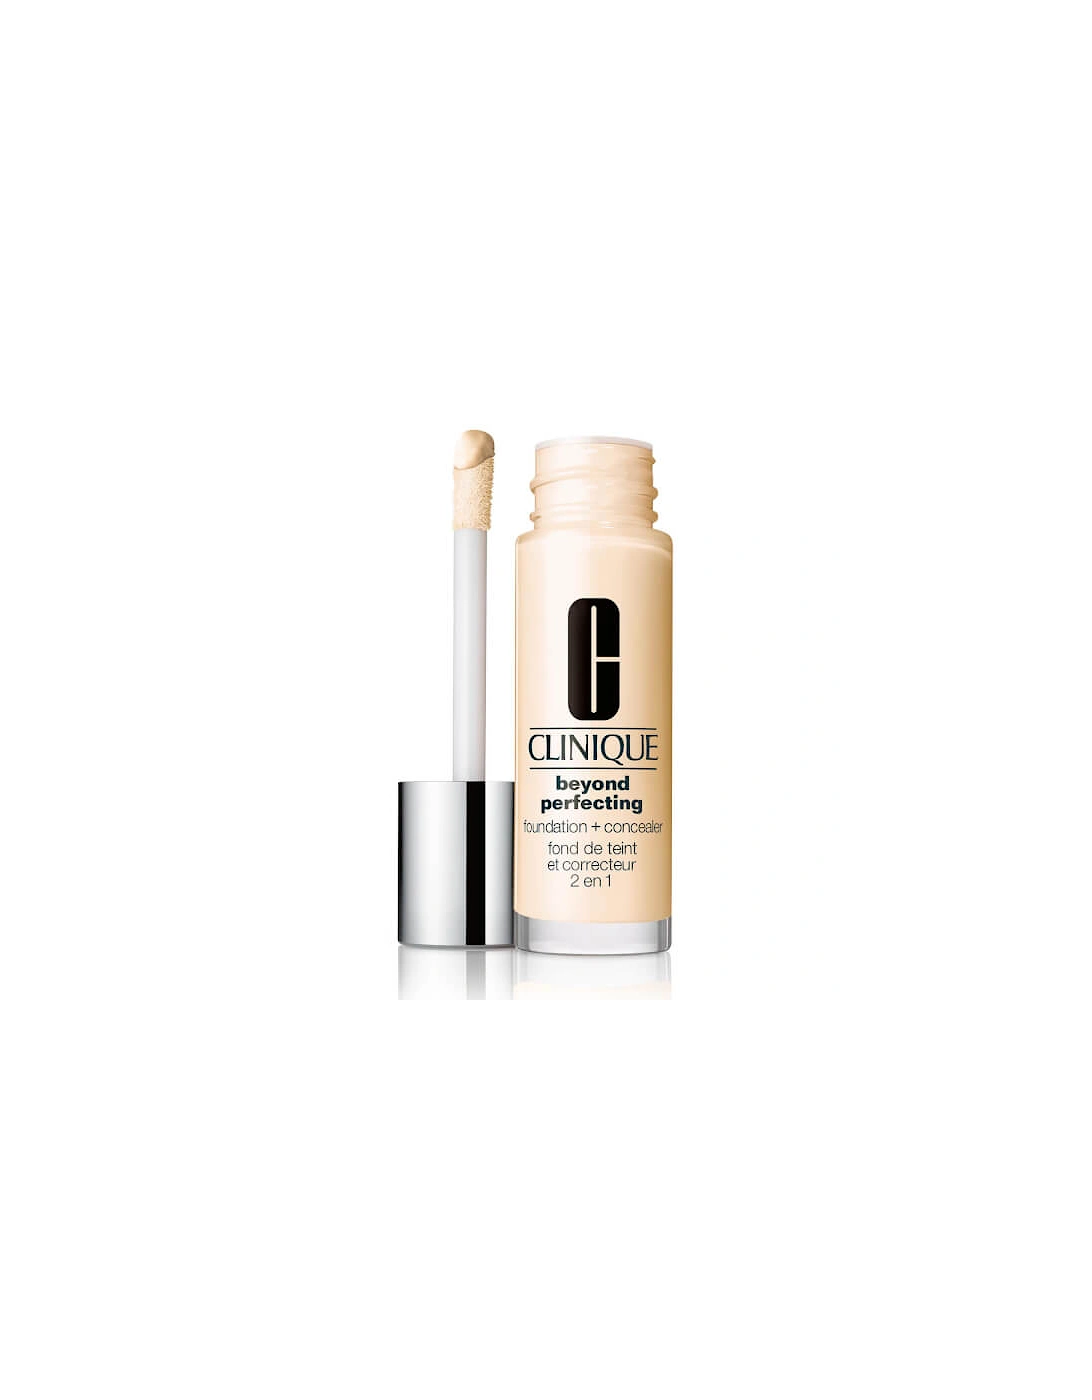 Beyond Perfecting Foundation and Concealer - WN 01 Flax, 2 of 1